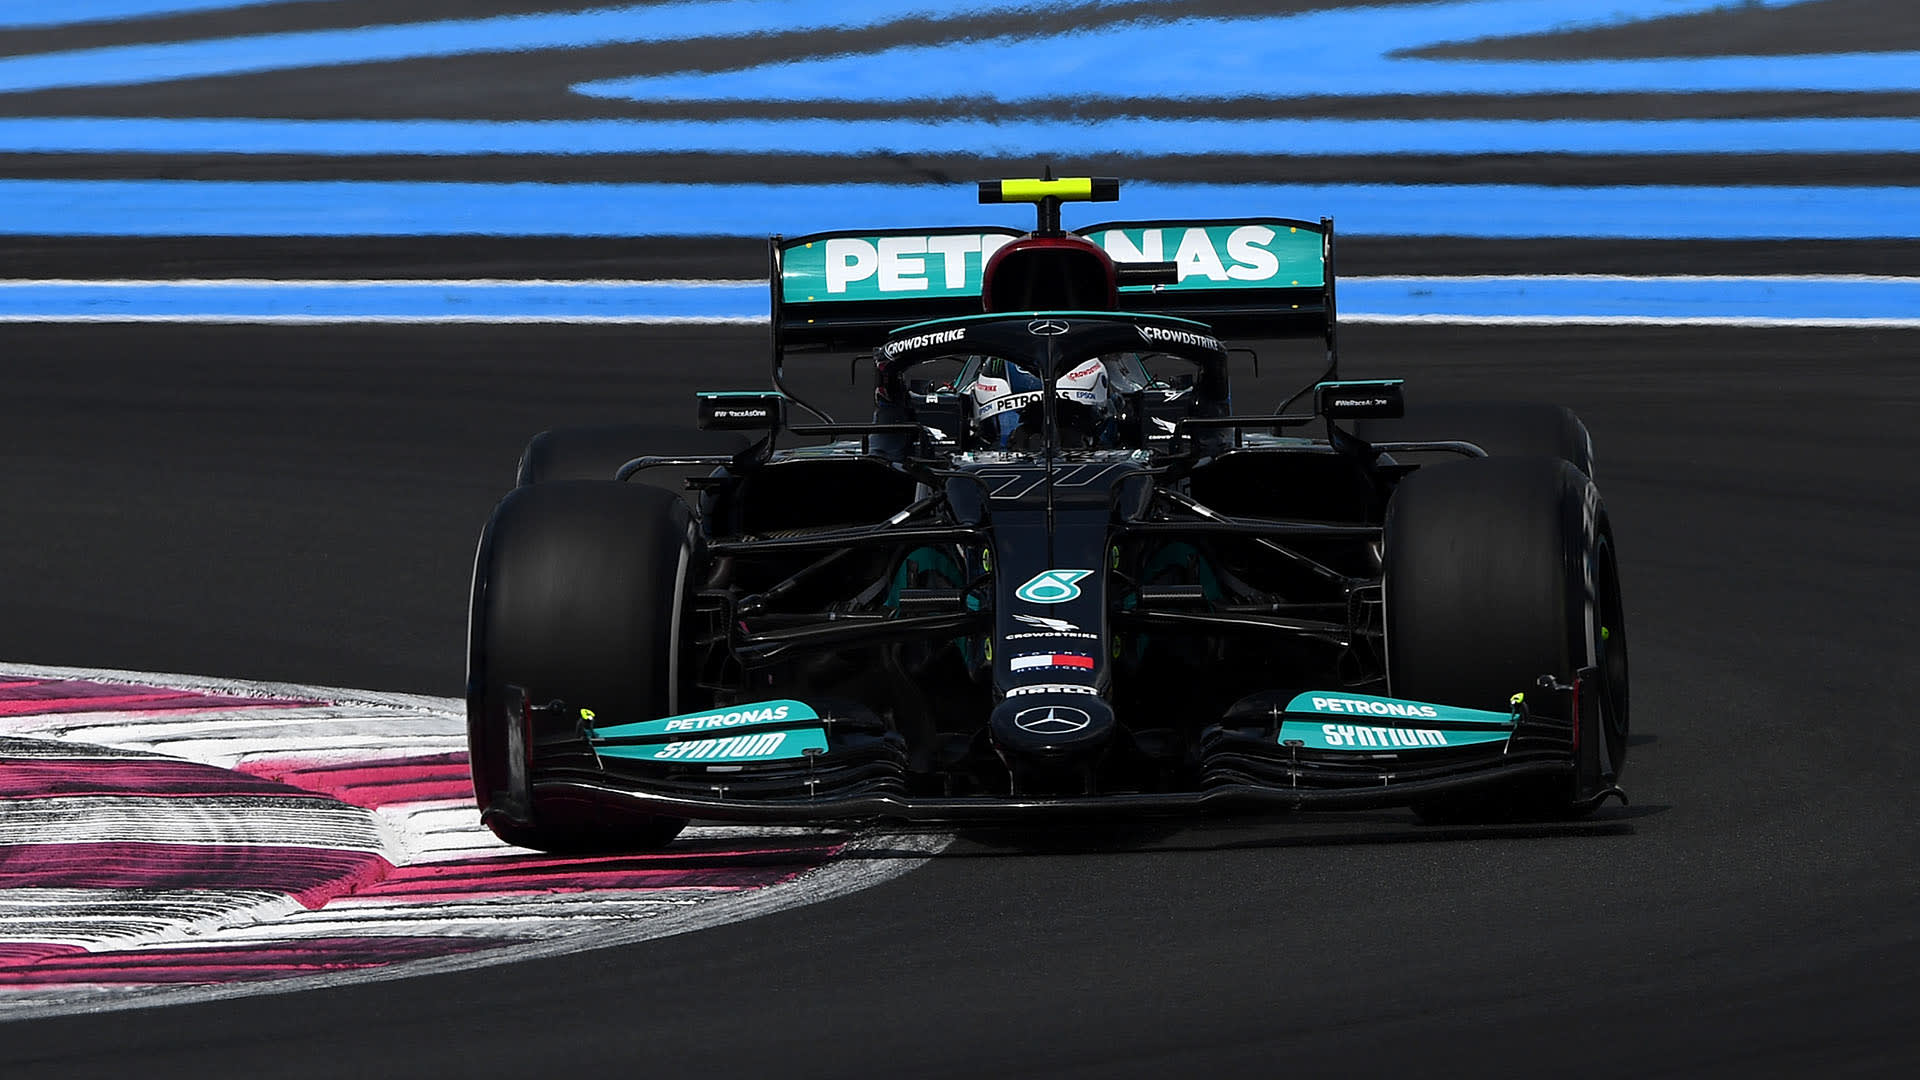 2021 French Grand Prix FP1 report Bottas heads Mercedes 1-2 in opening practice session with Verstappen third Formula 1®